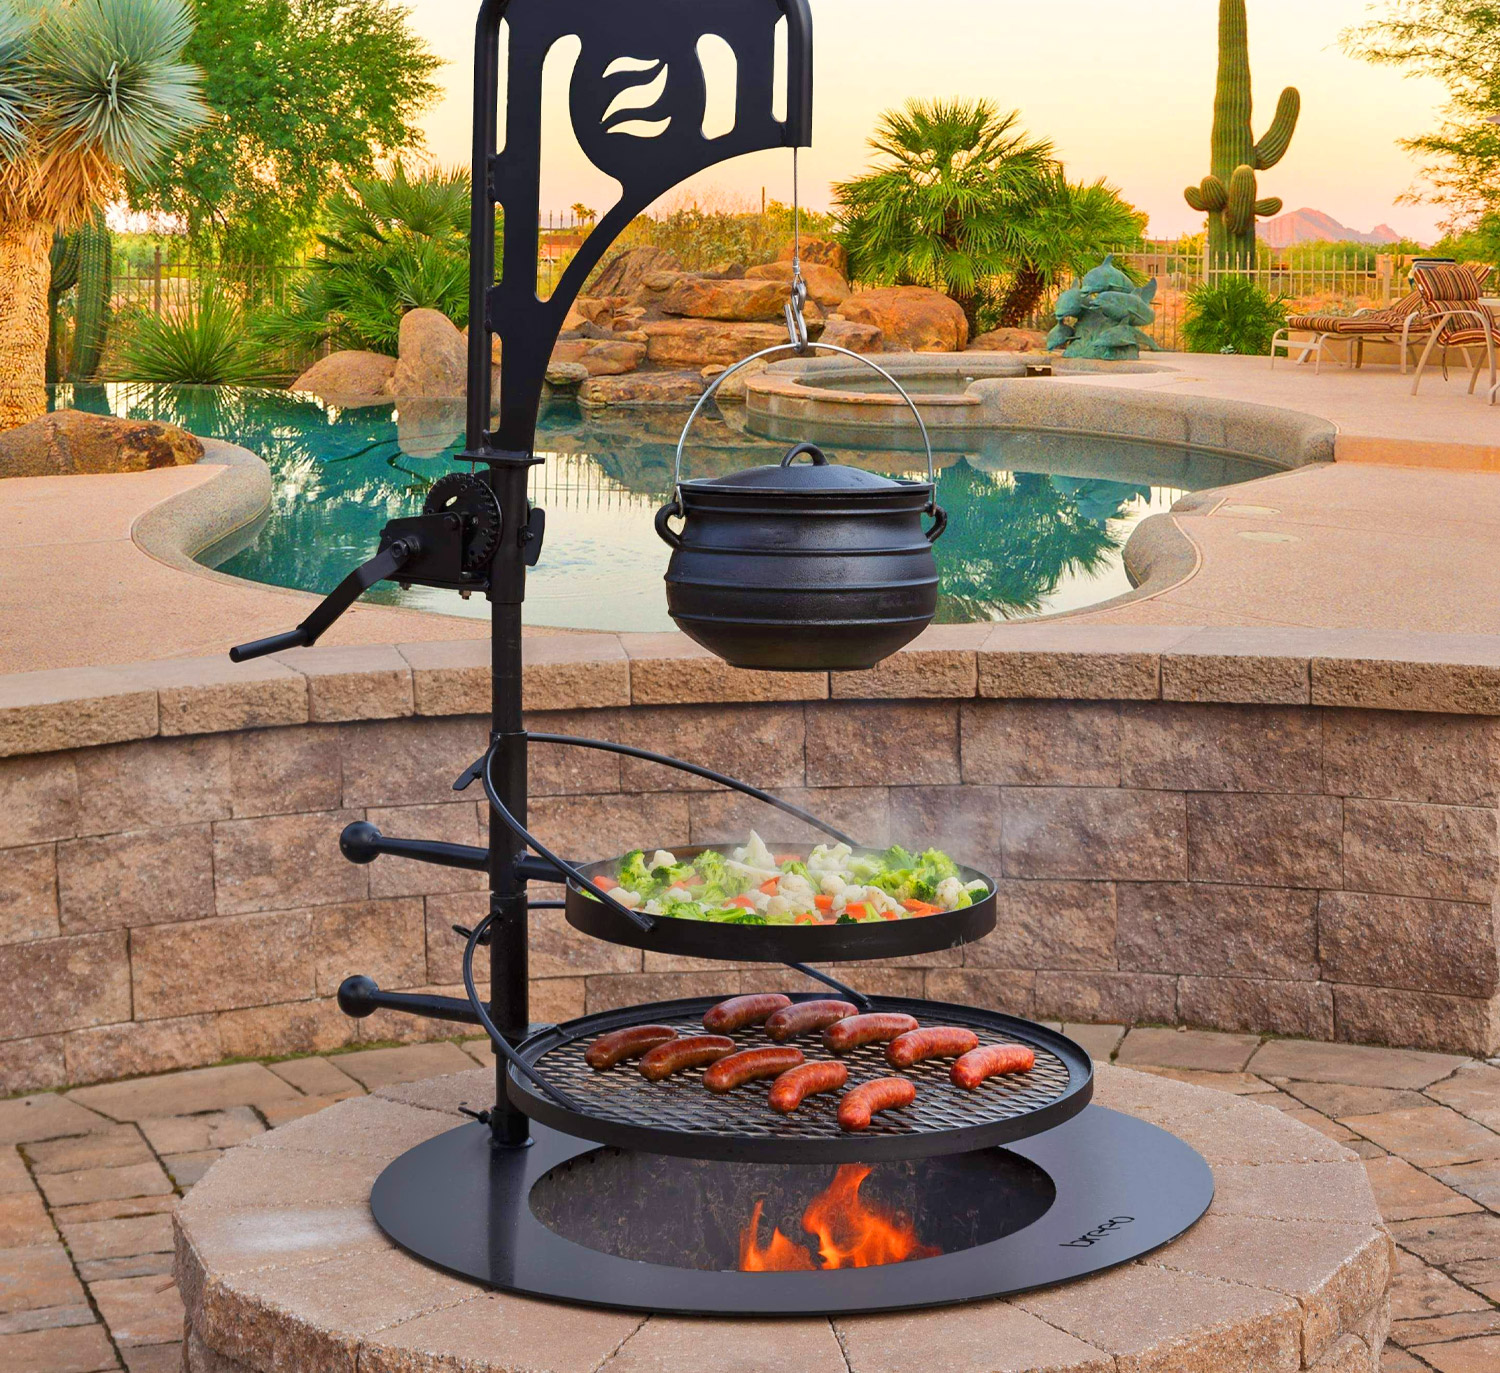 Fire Pit Into A Tiered Cooking Machine, Tripod Crystal Fire Pit Grill